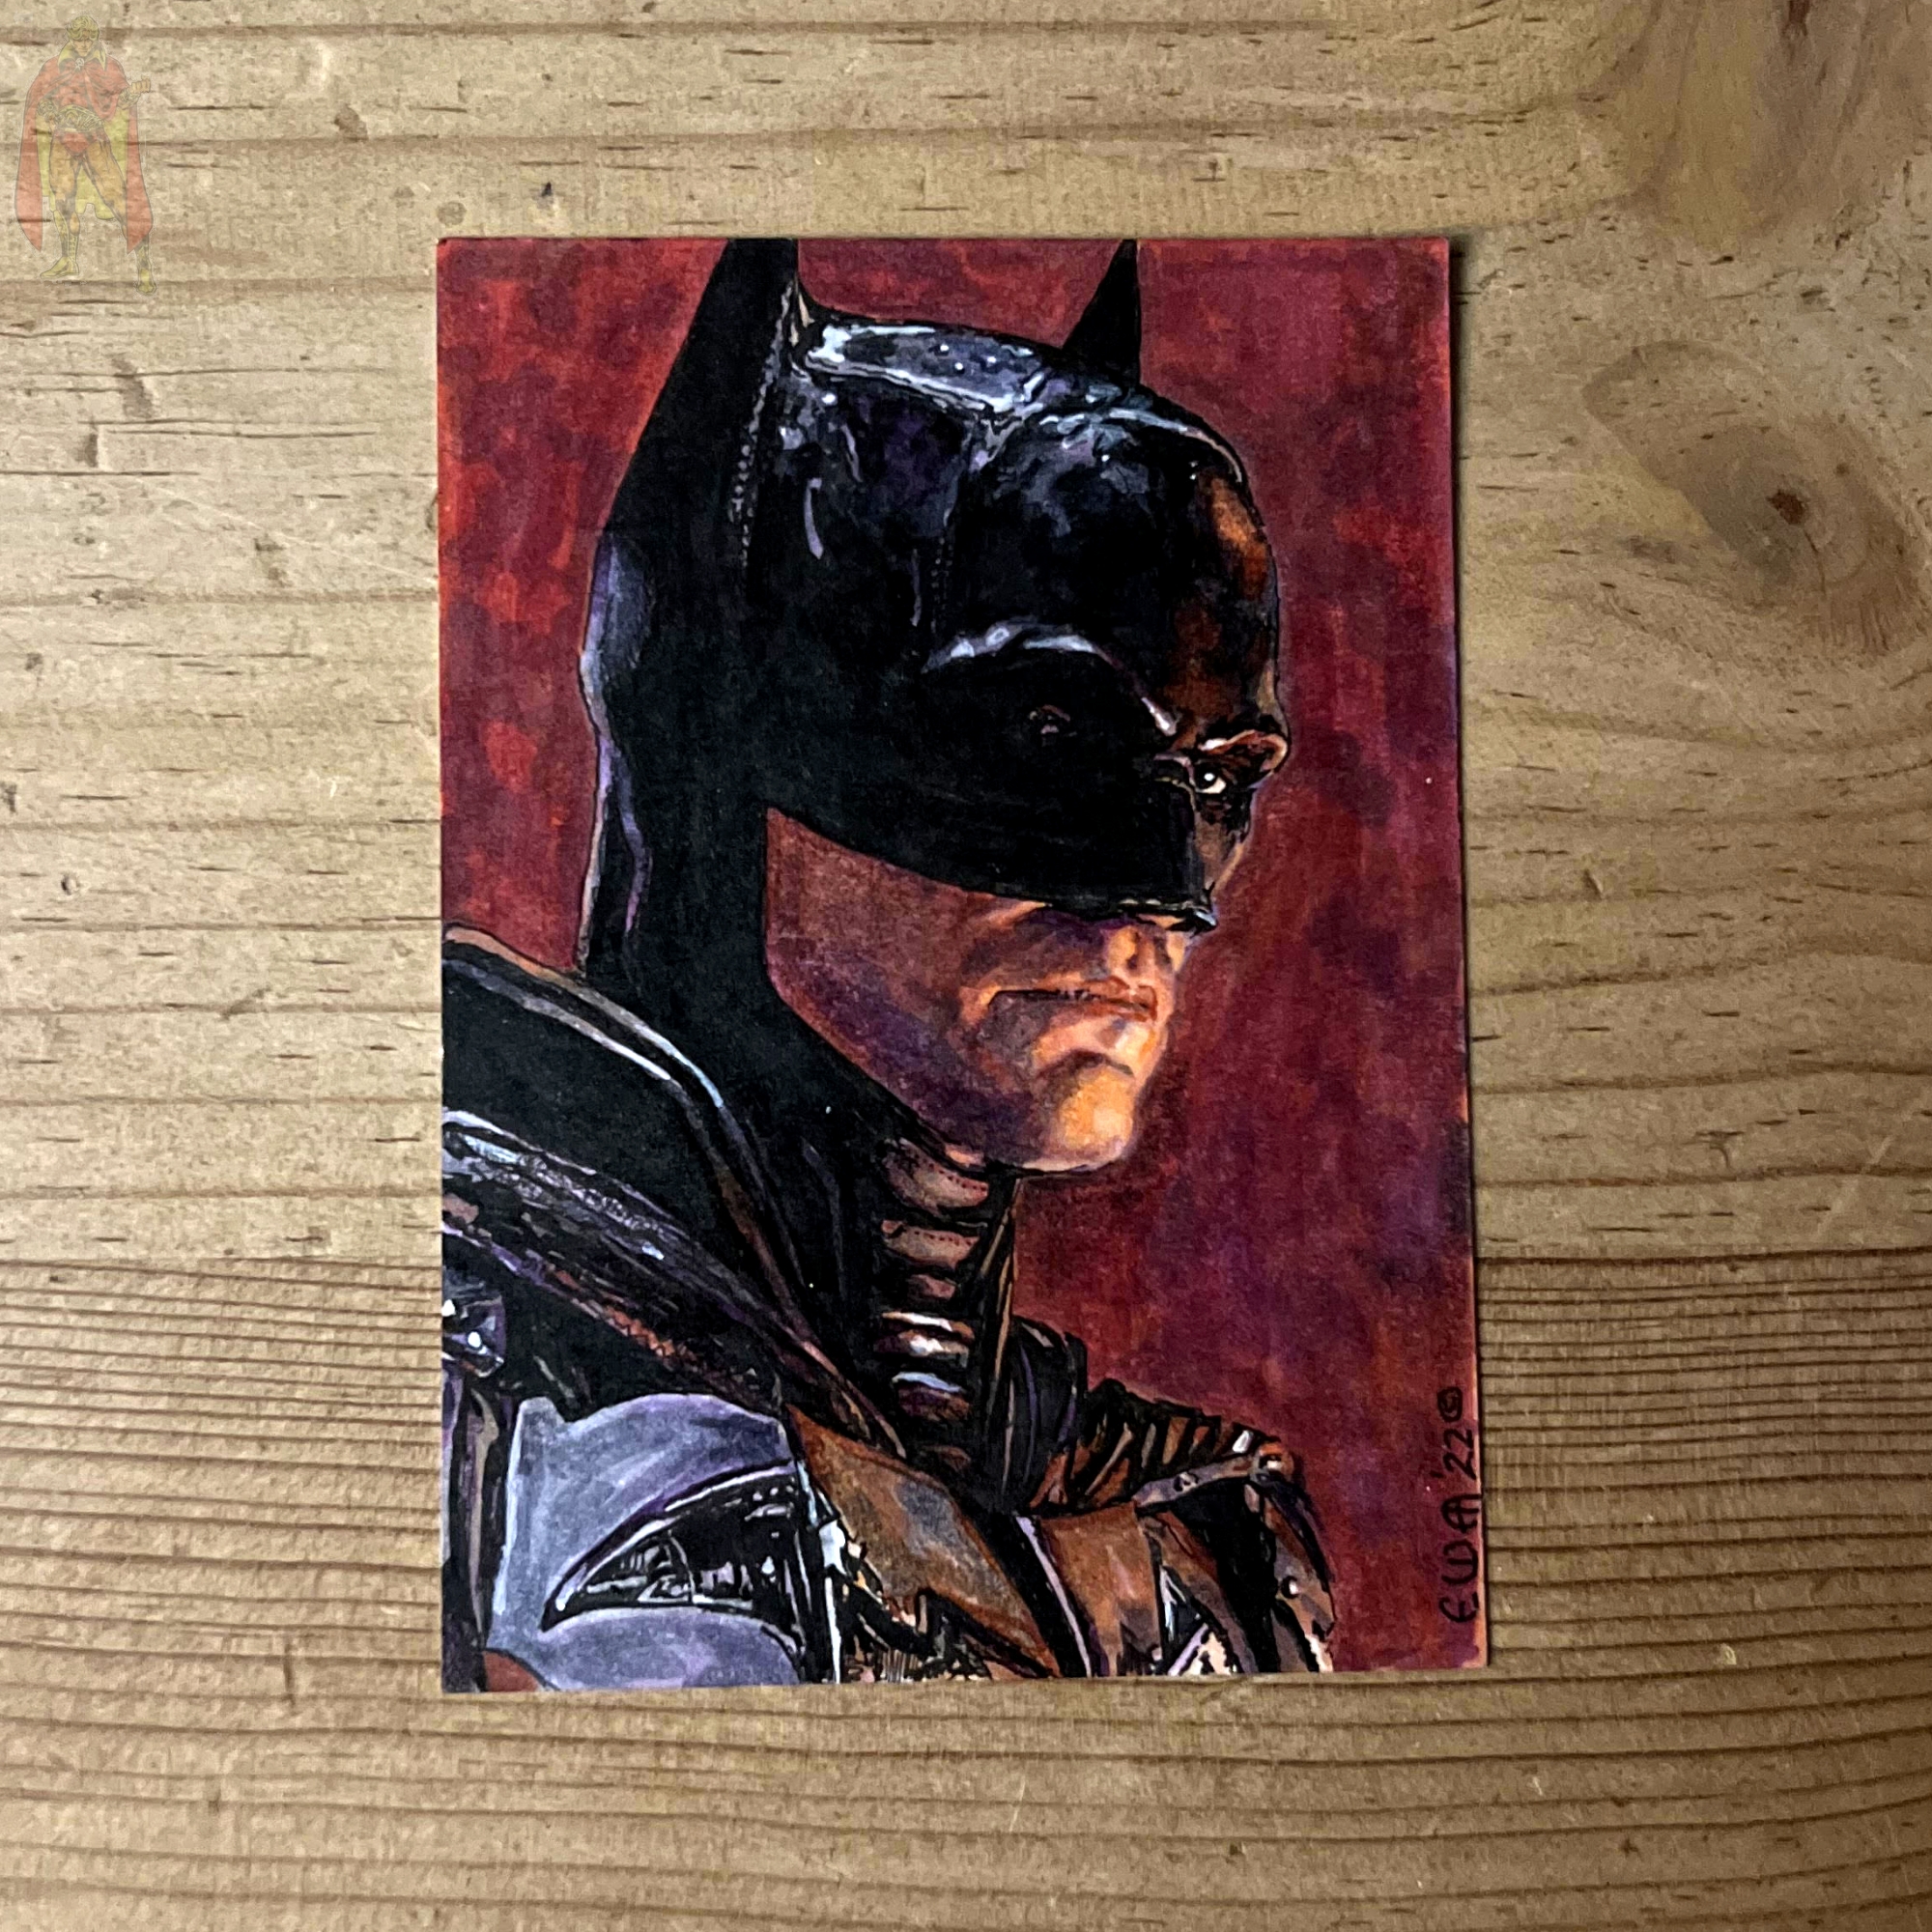 Comic Art Shop :: Kirk Dilbeck (3-Wishes and Patron-of-art) 's Comic Art  Shop :: The Batman  x  copic marker sketch card by Eric W. Meador ::  The largest selection of